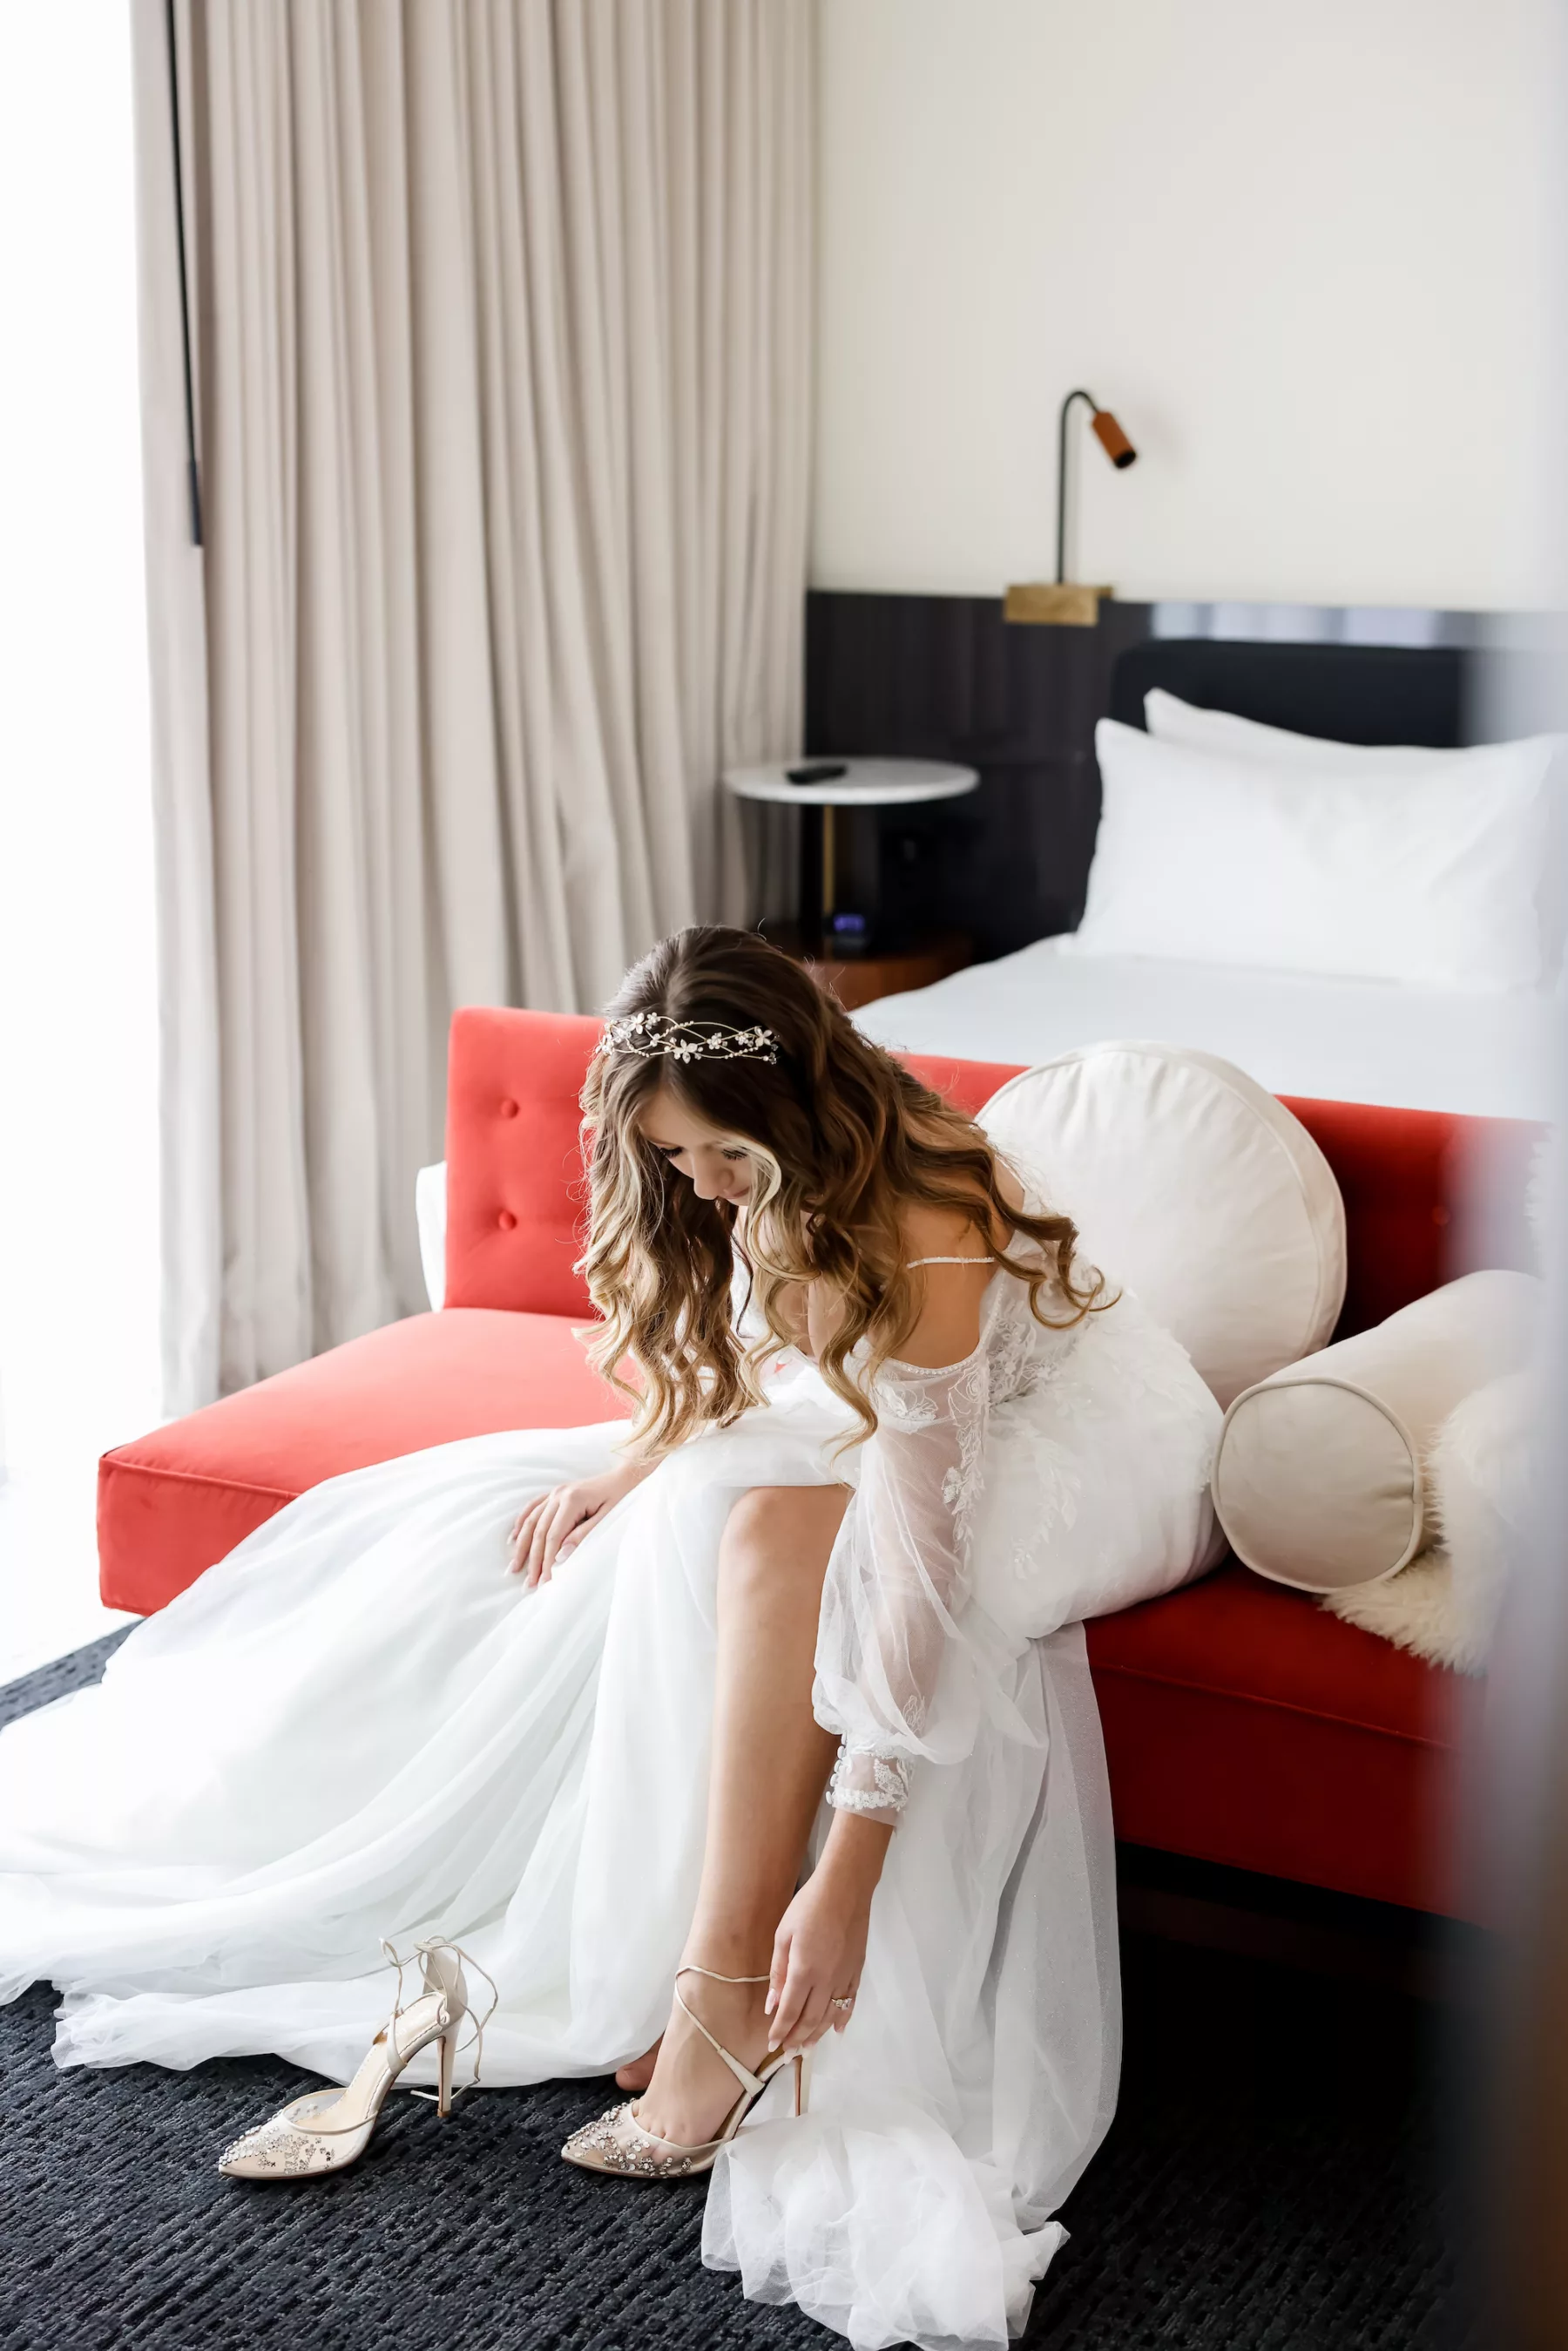 Bride Getting Ready Wedding Portrait | Crystal Flower Headband Bridal Accessory | Emerald Diamond Engagement Ring Inspiration | White Lace and Tulle Cold Shoulder A-Line Wedding Dress Ideas | Boutique Truly Forever Bridal Tampa | Photographer Lifelong Photography Studio